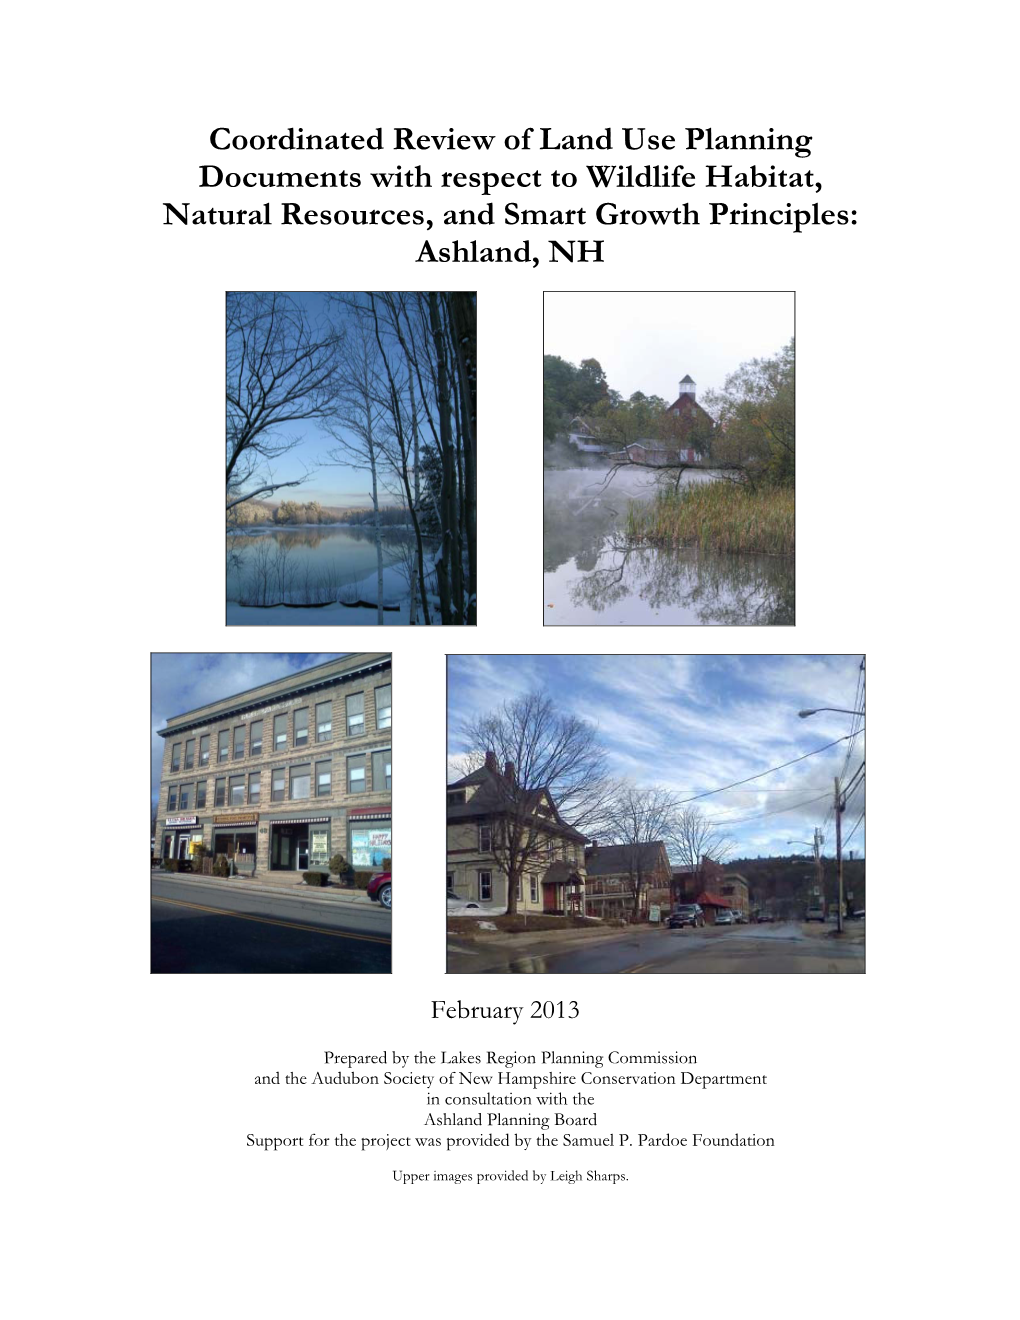 Coordinated Review of Land Use Planning Documents with Respect to Wildlife Habitat, Natural Resources, and Smart Growth Principles: Ashland, NH